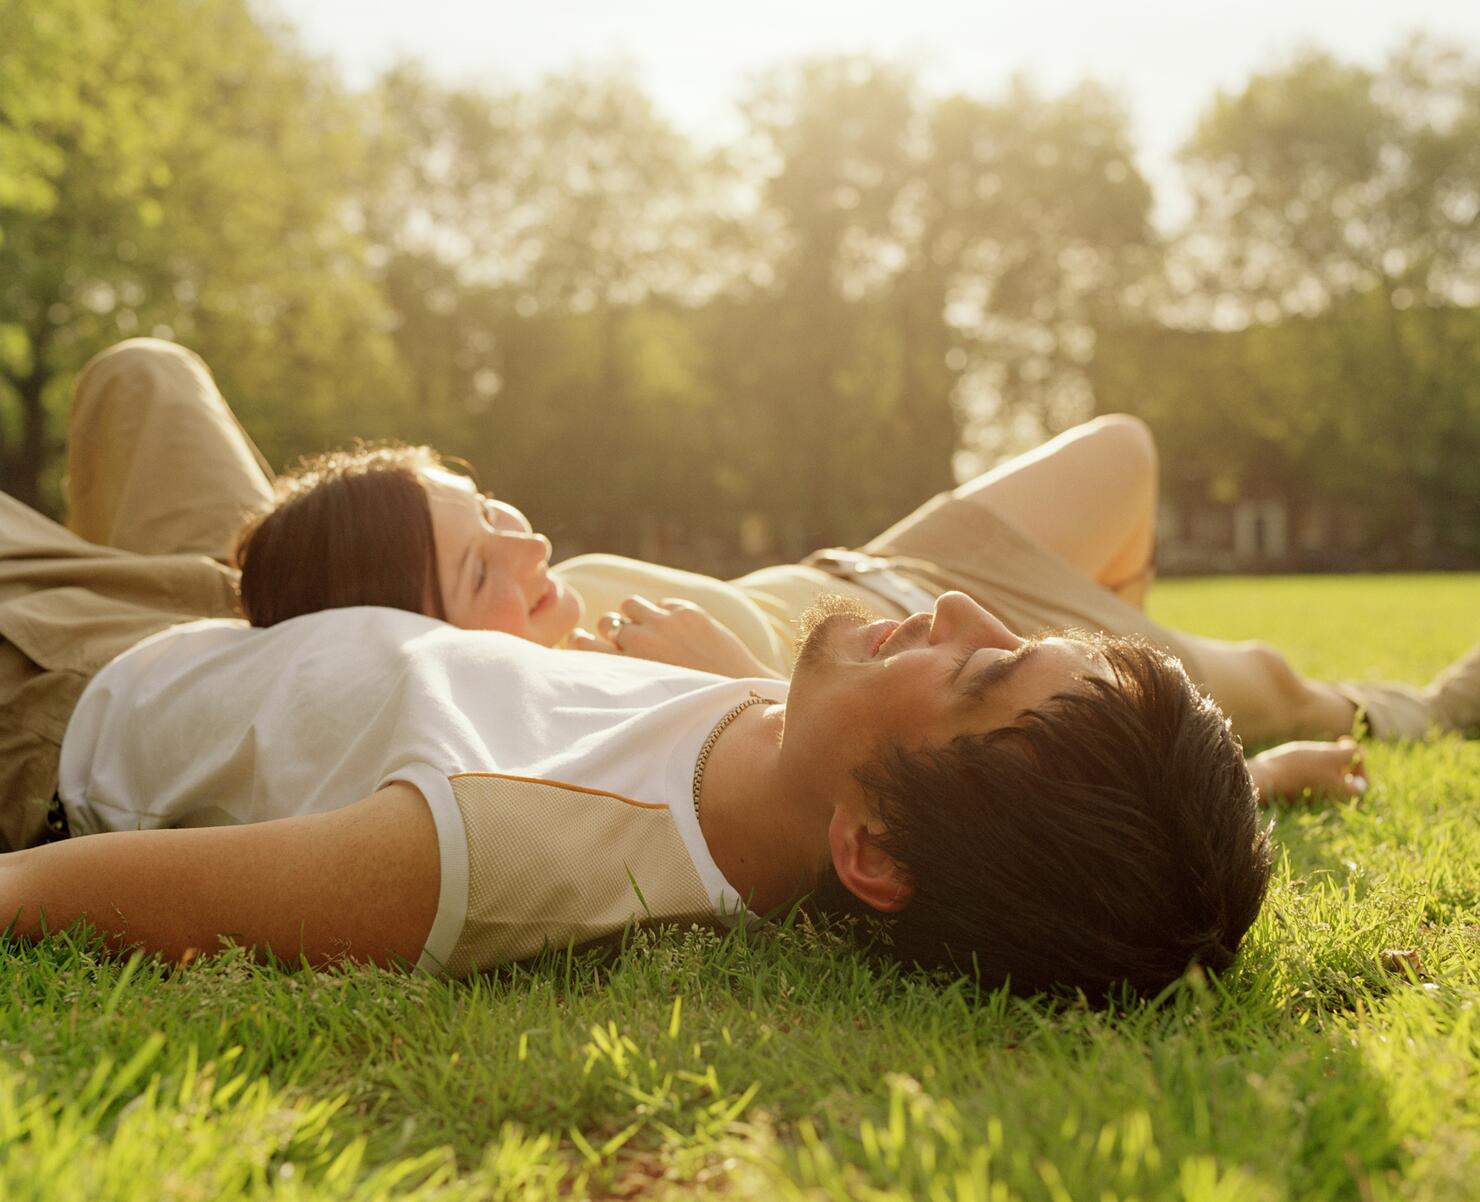 Couple Lying in Park